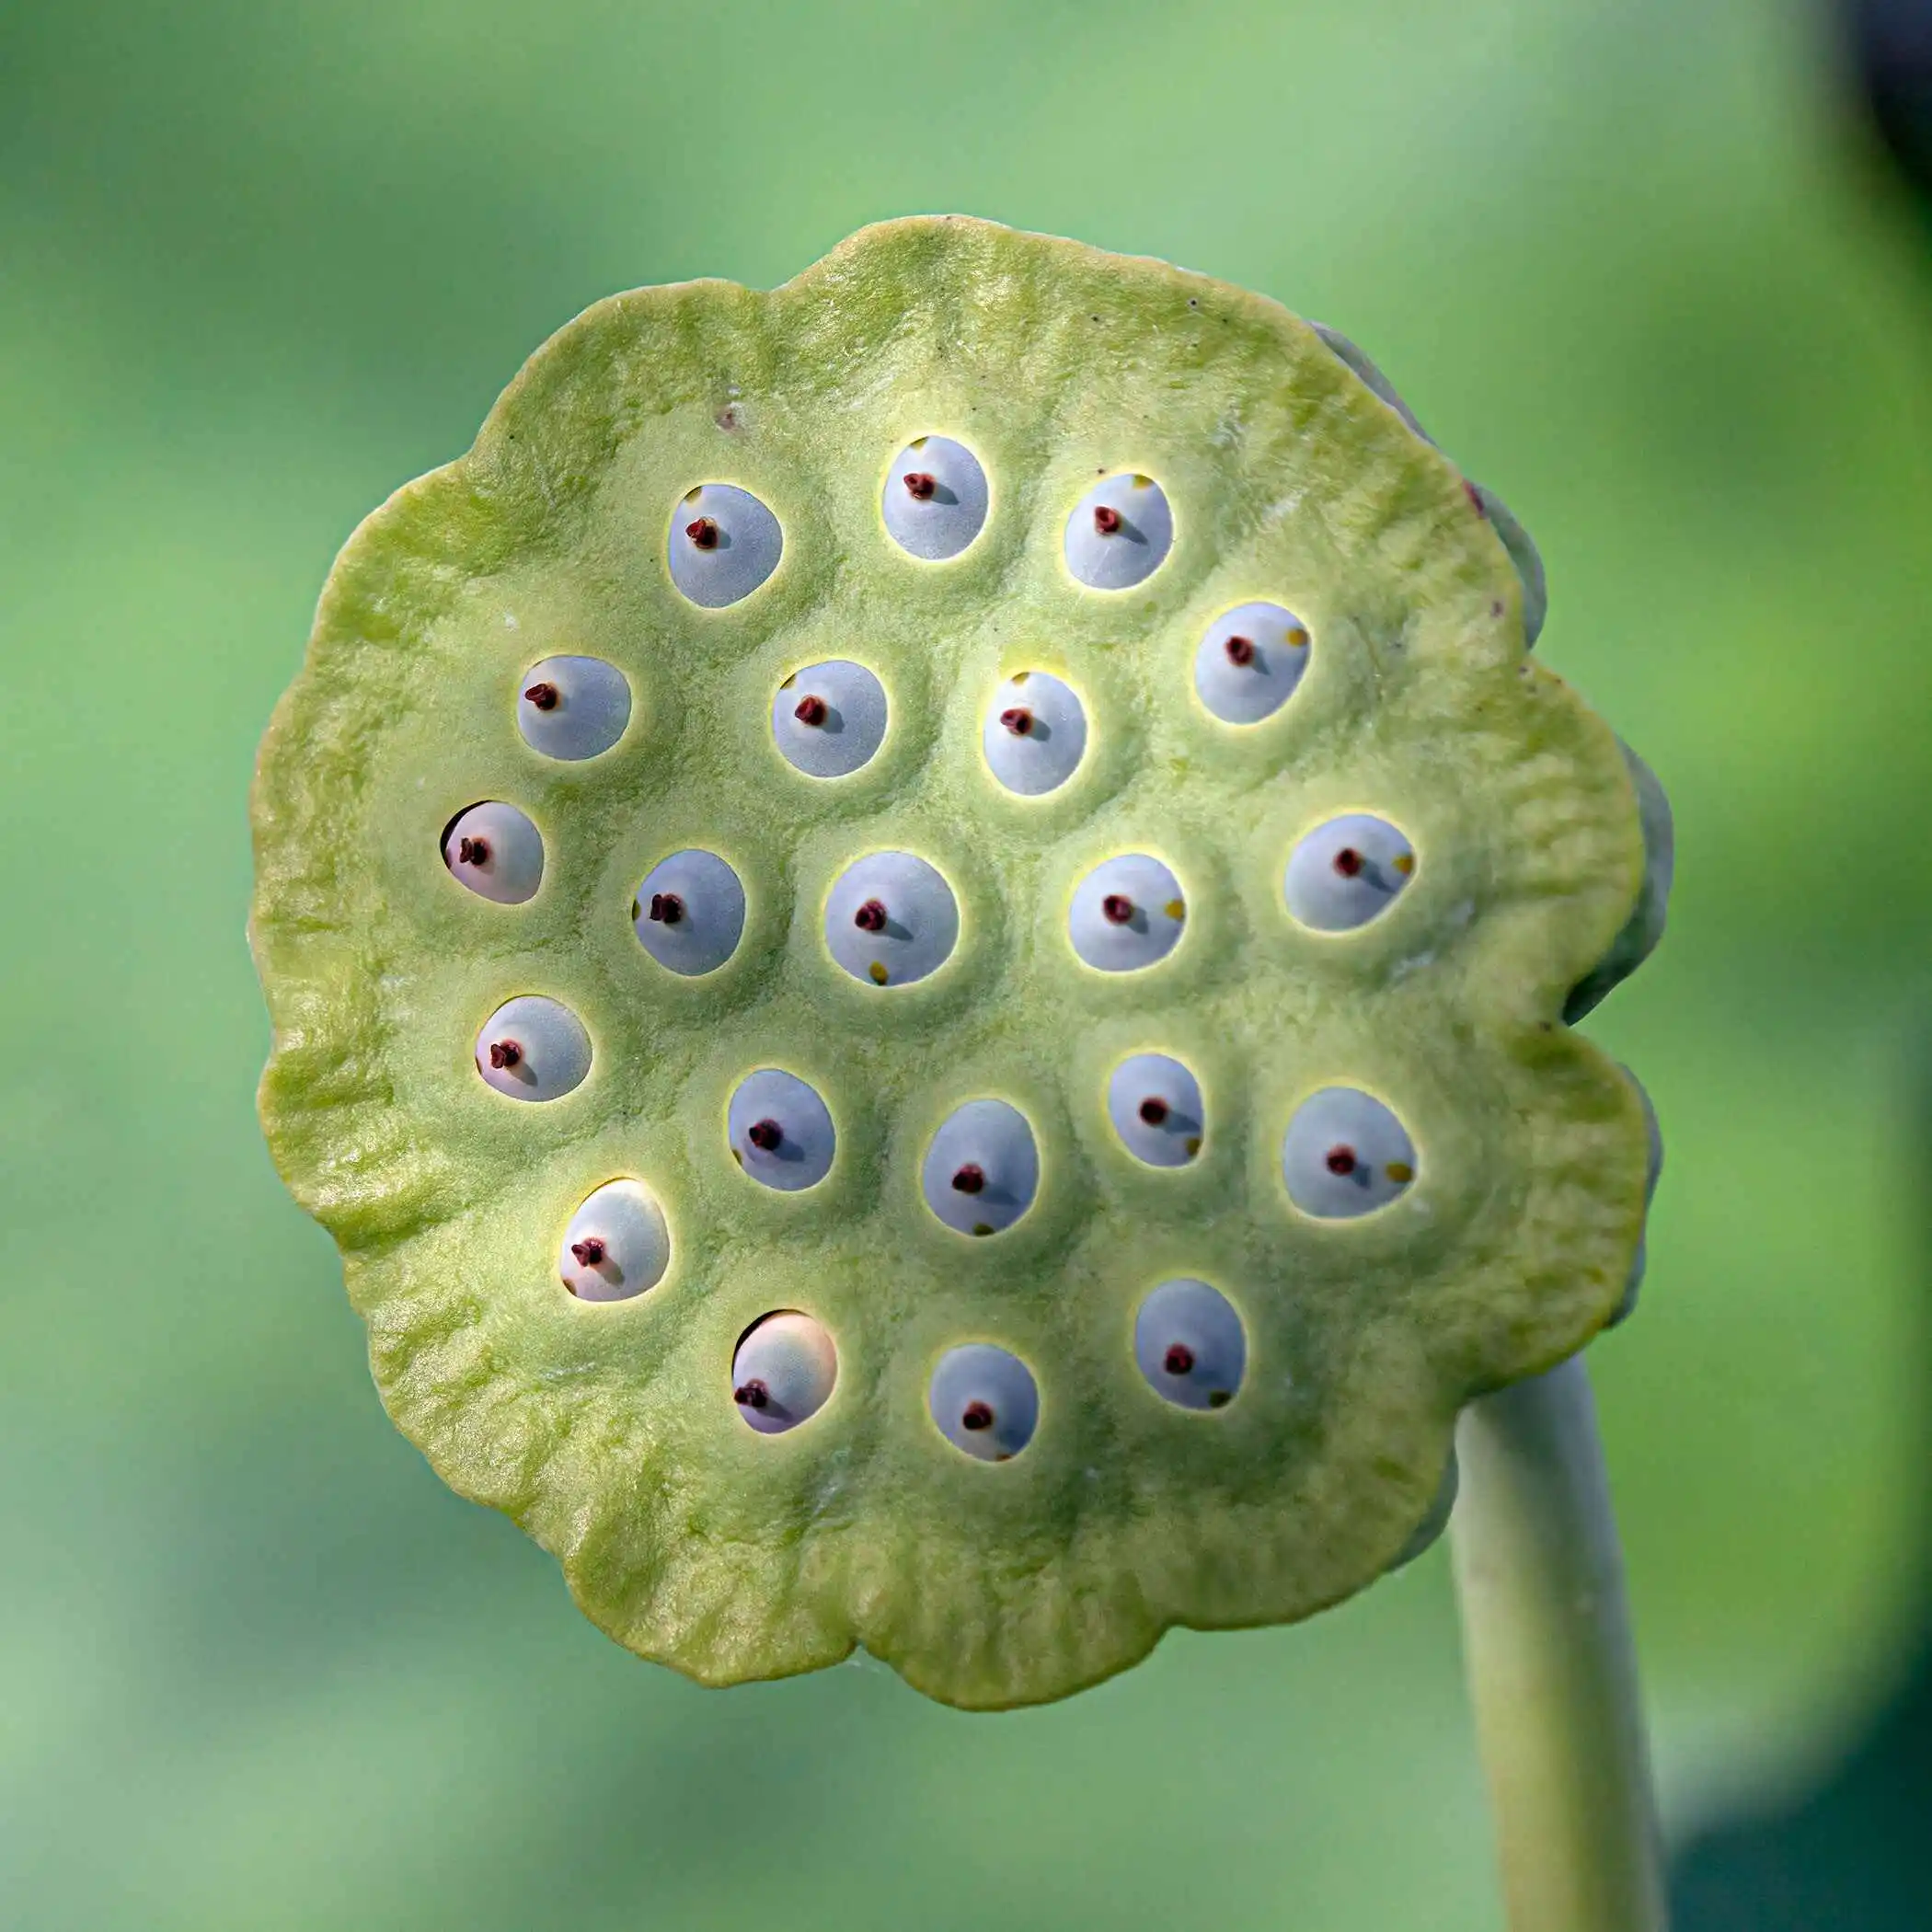 Lotus Seed Pods